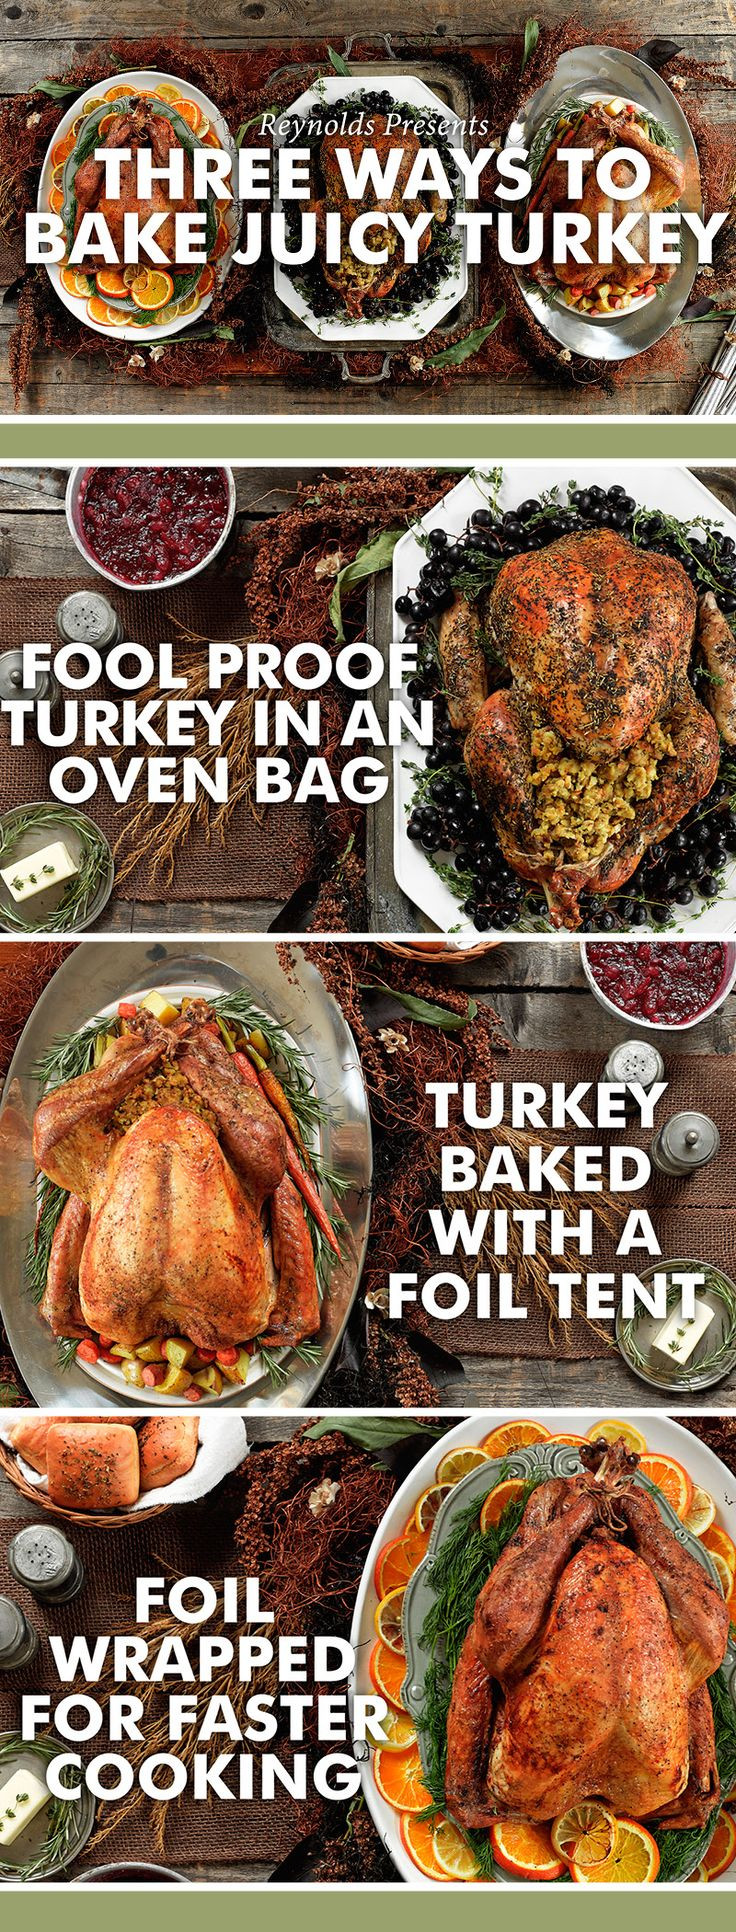 Best Way To Cook Thanksgiving Turkey
 Here are three different ways to cook your Thanksgiving